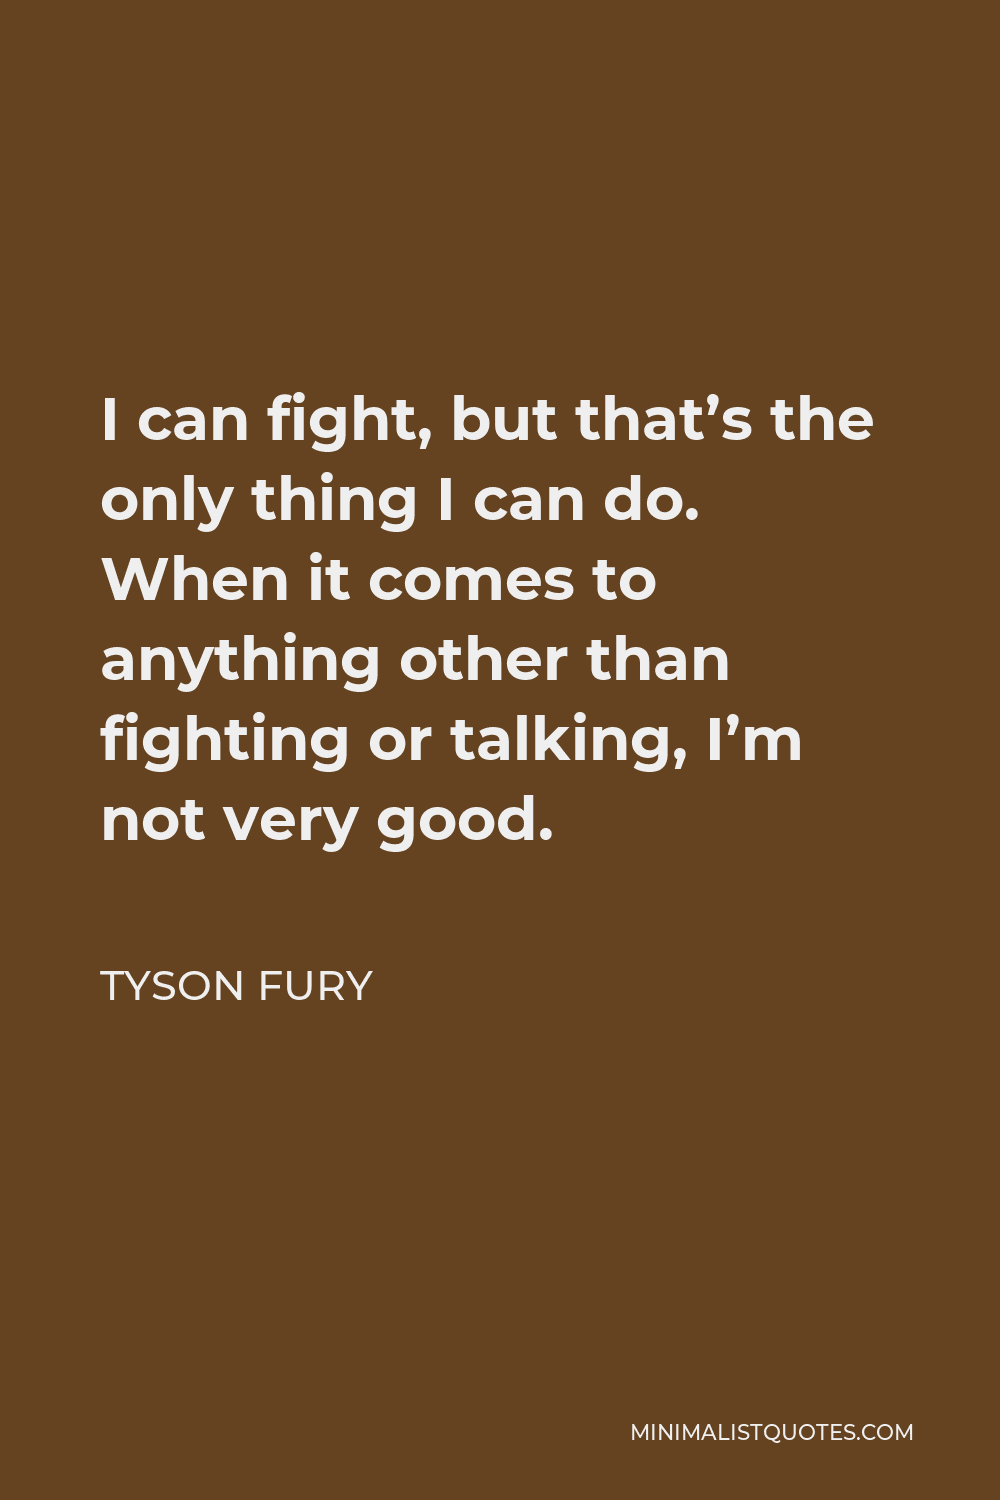 Tyson Fury Quote - I can fight, but that’s the only thing I can do. When it comes to anything other than fighting or talking, I’m not very good.